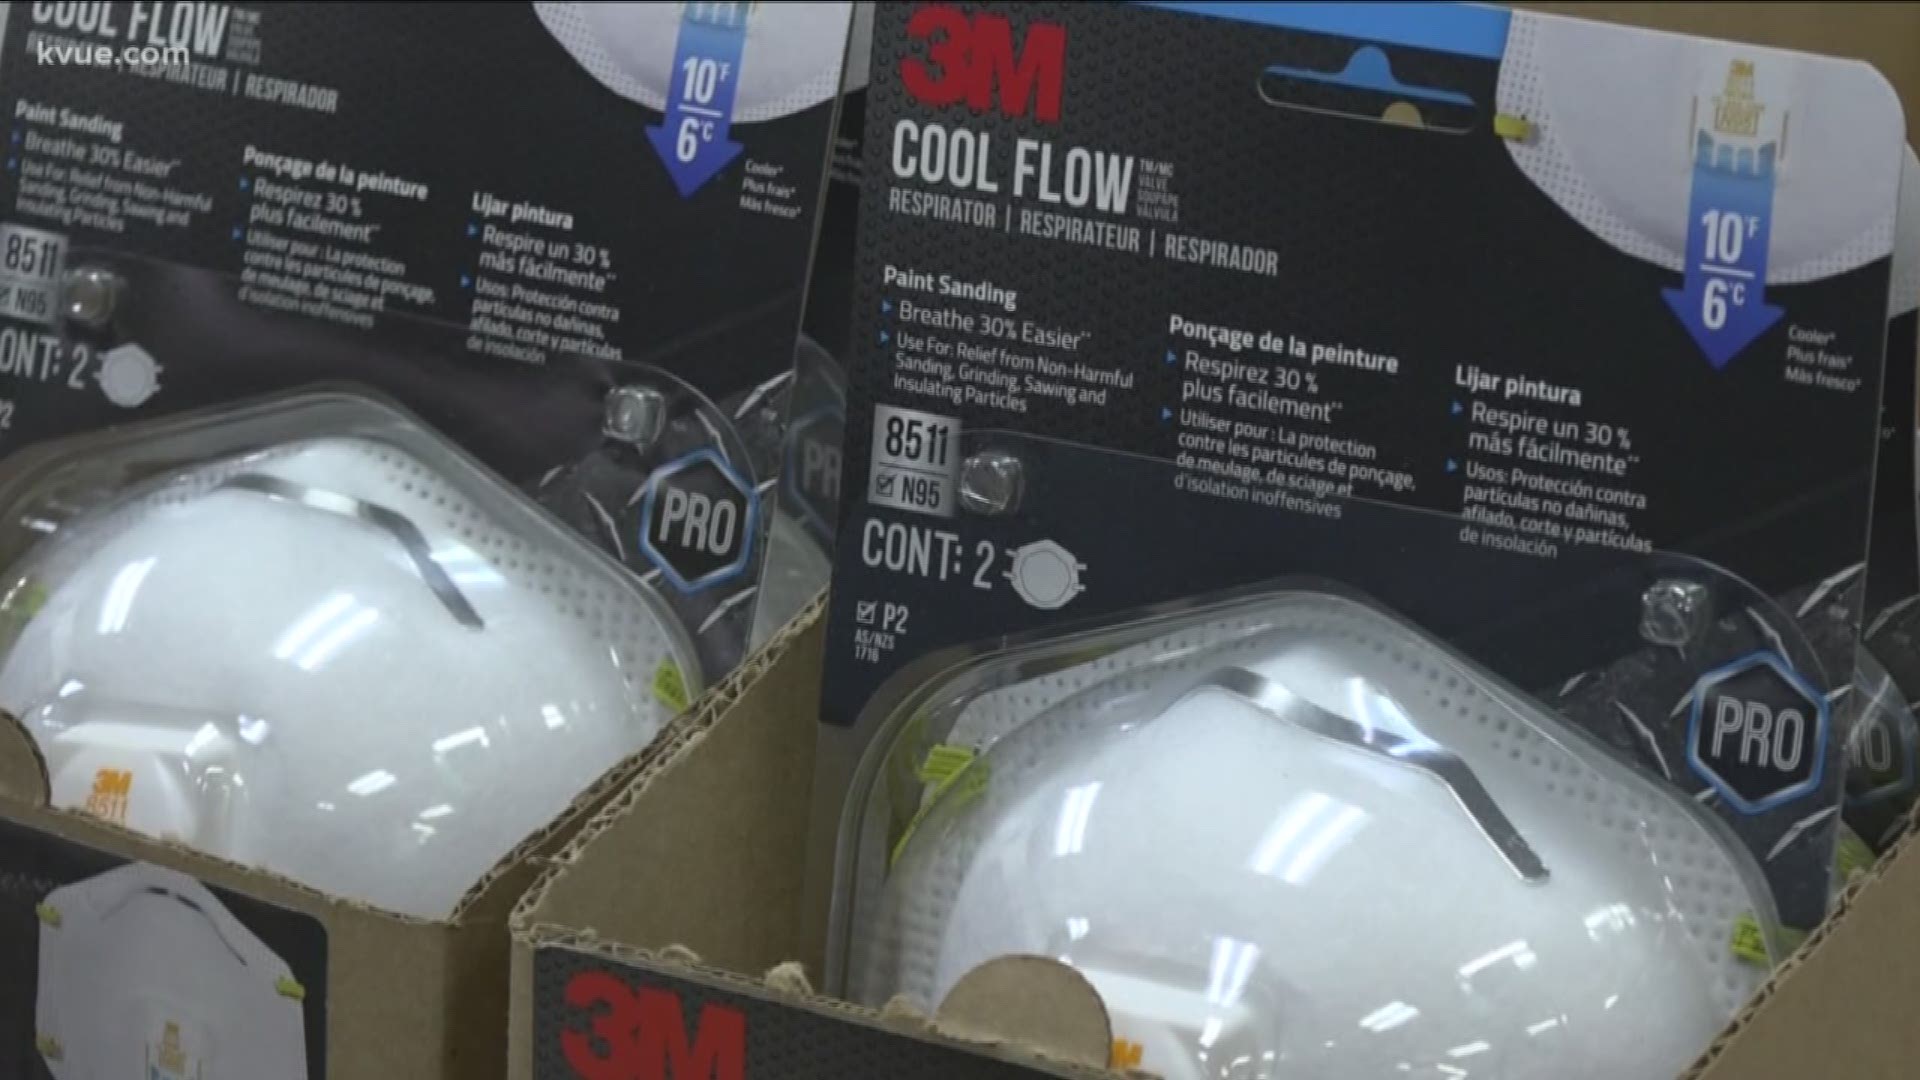 Austin stores are selling out of masks because of coronavirus scare | 0